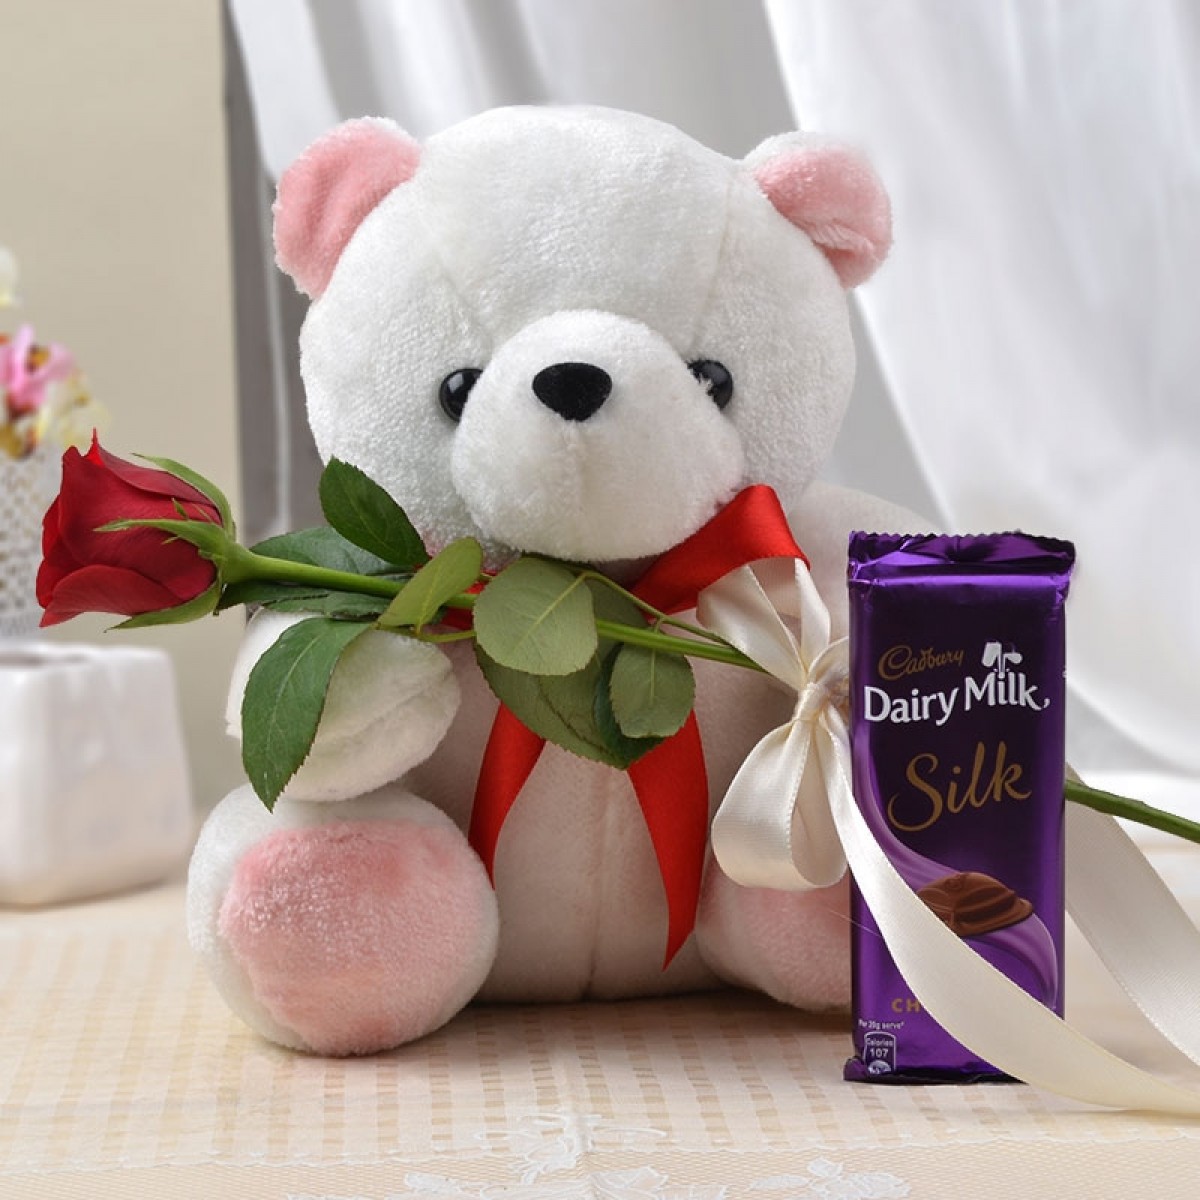 Cute Teddy Bear Image with Red Rose and Chocolate